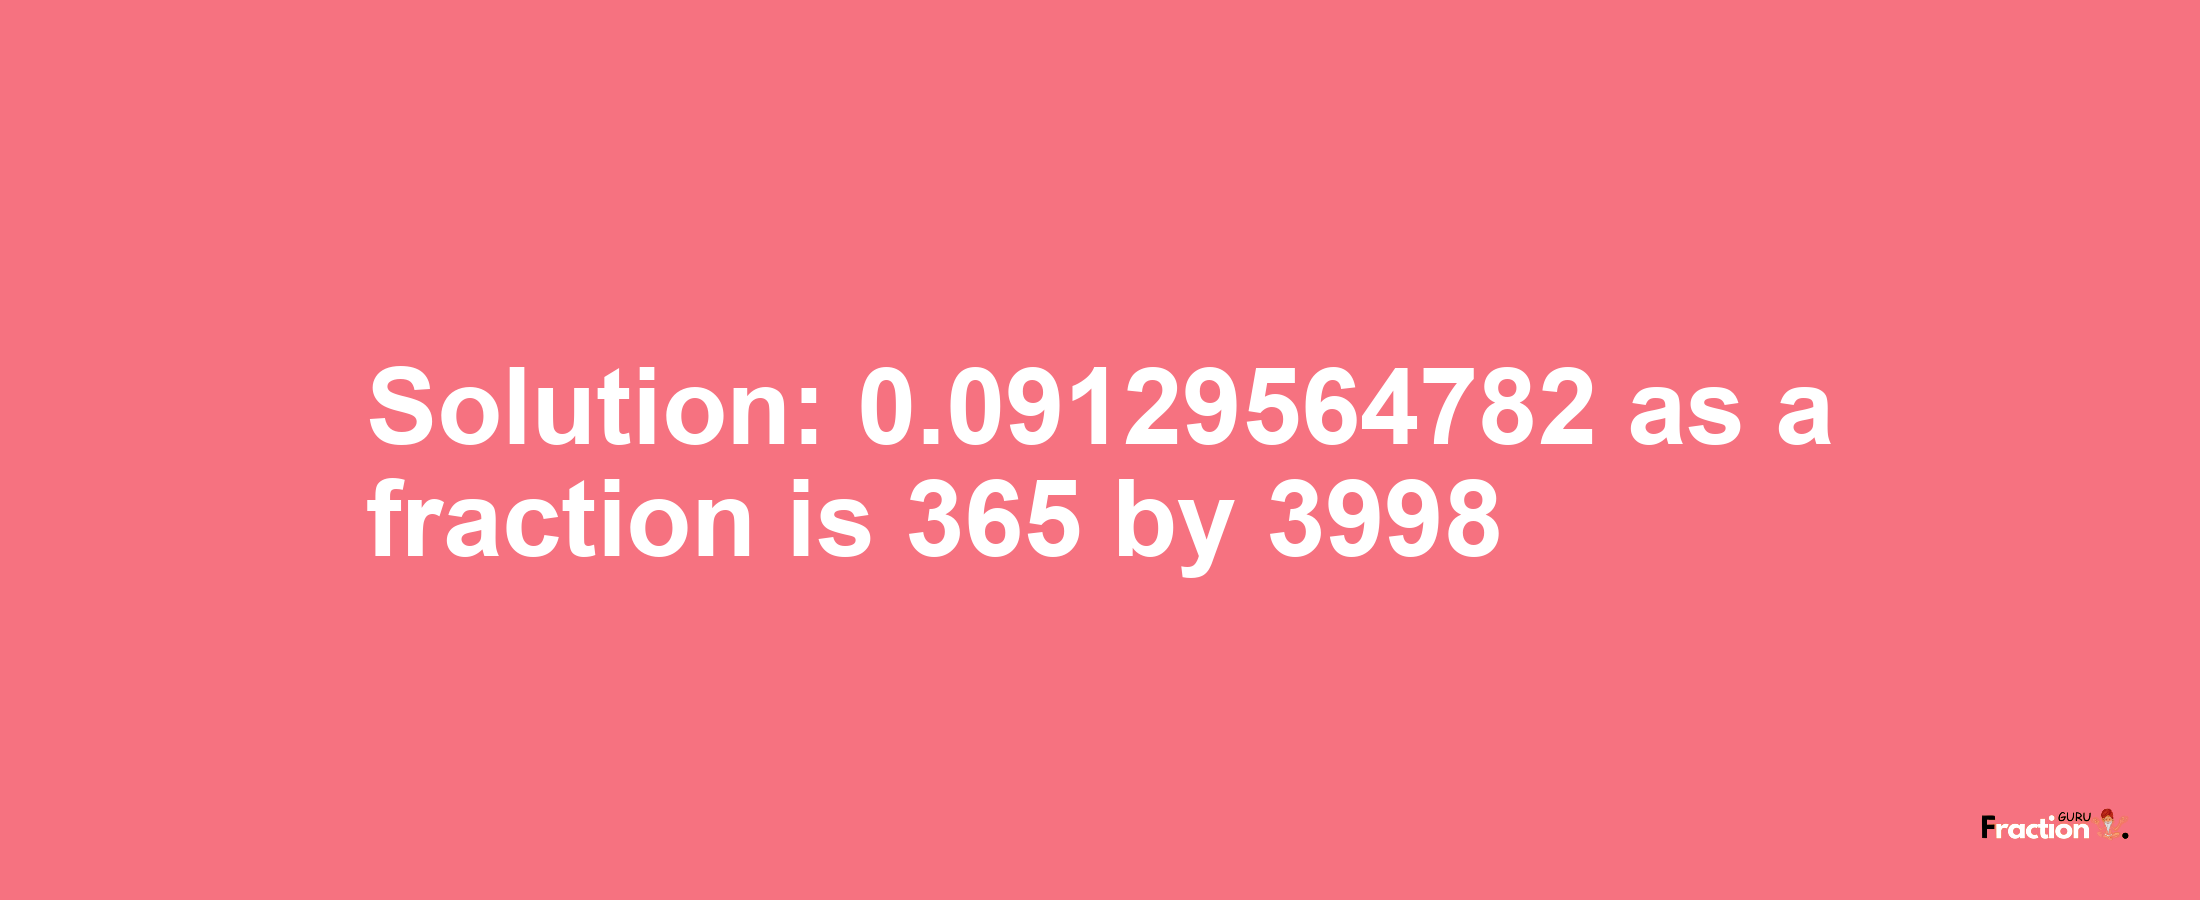 Solution:0.09129564782 as a fraction is 365/3998